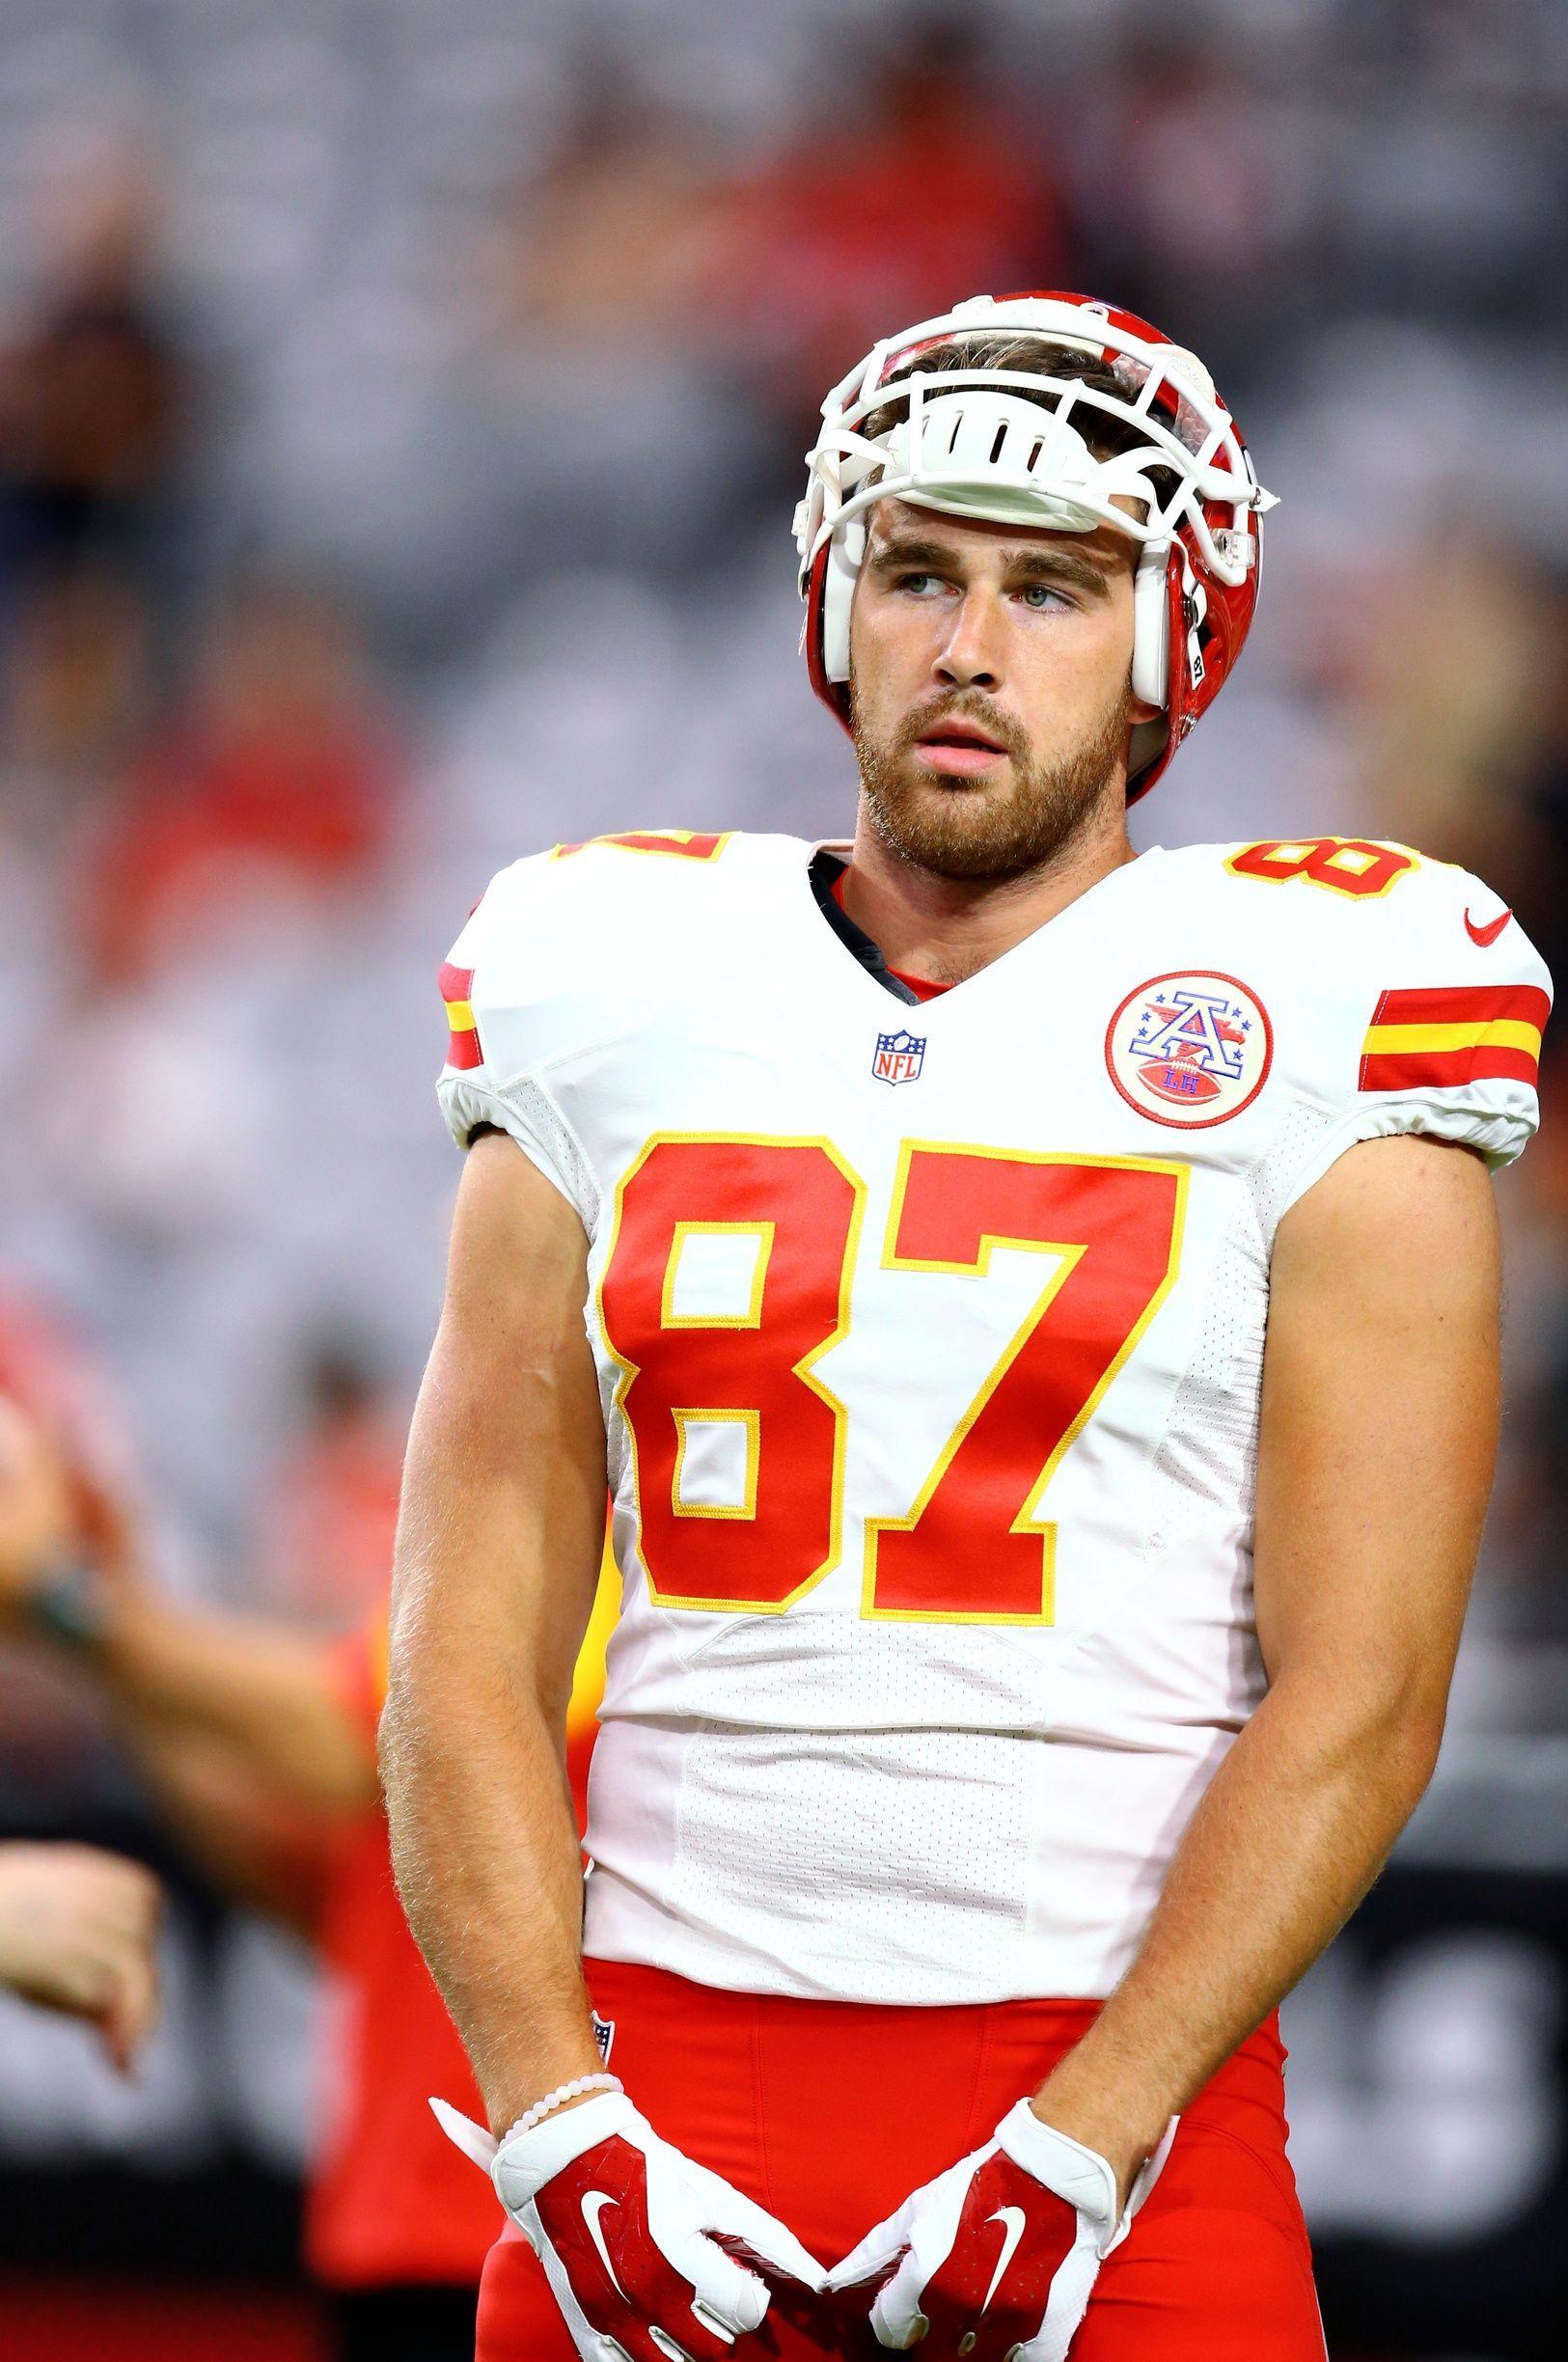 Smexy. Travis kelce and Hot guys